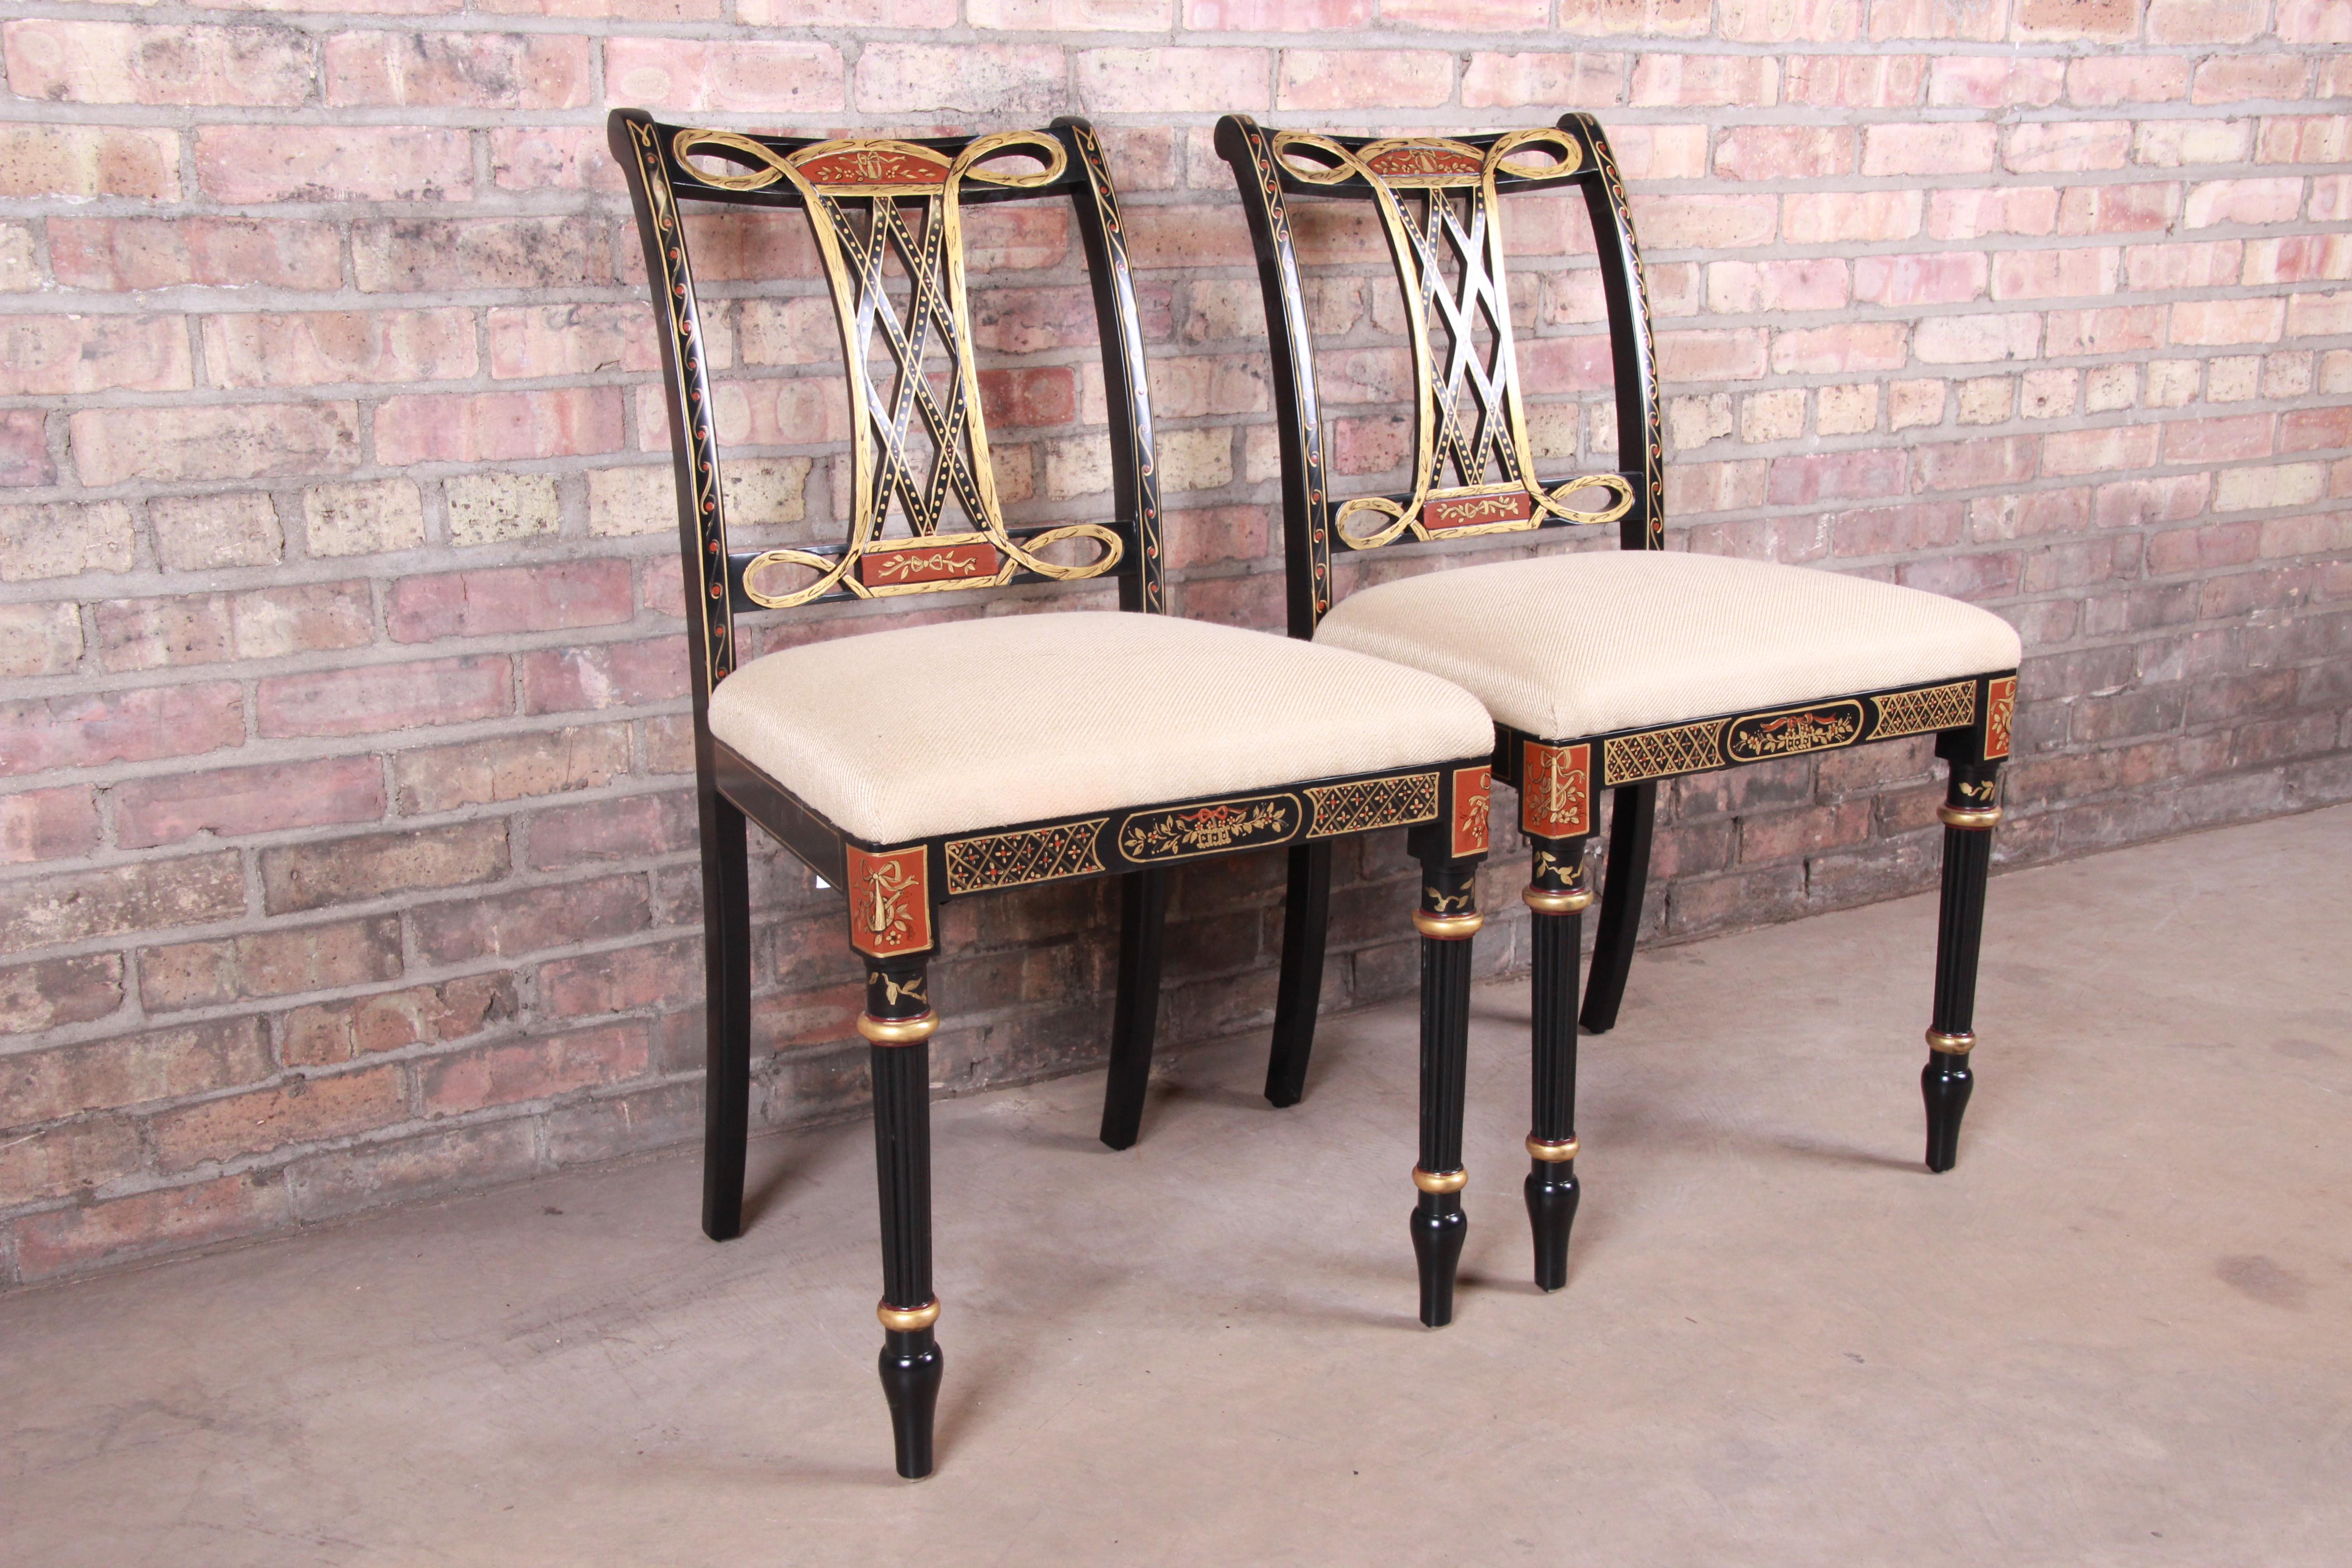 Upholstery Councill Regency Ebonized Hand Painted Side Chairs, Pair